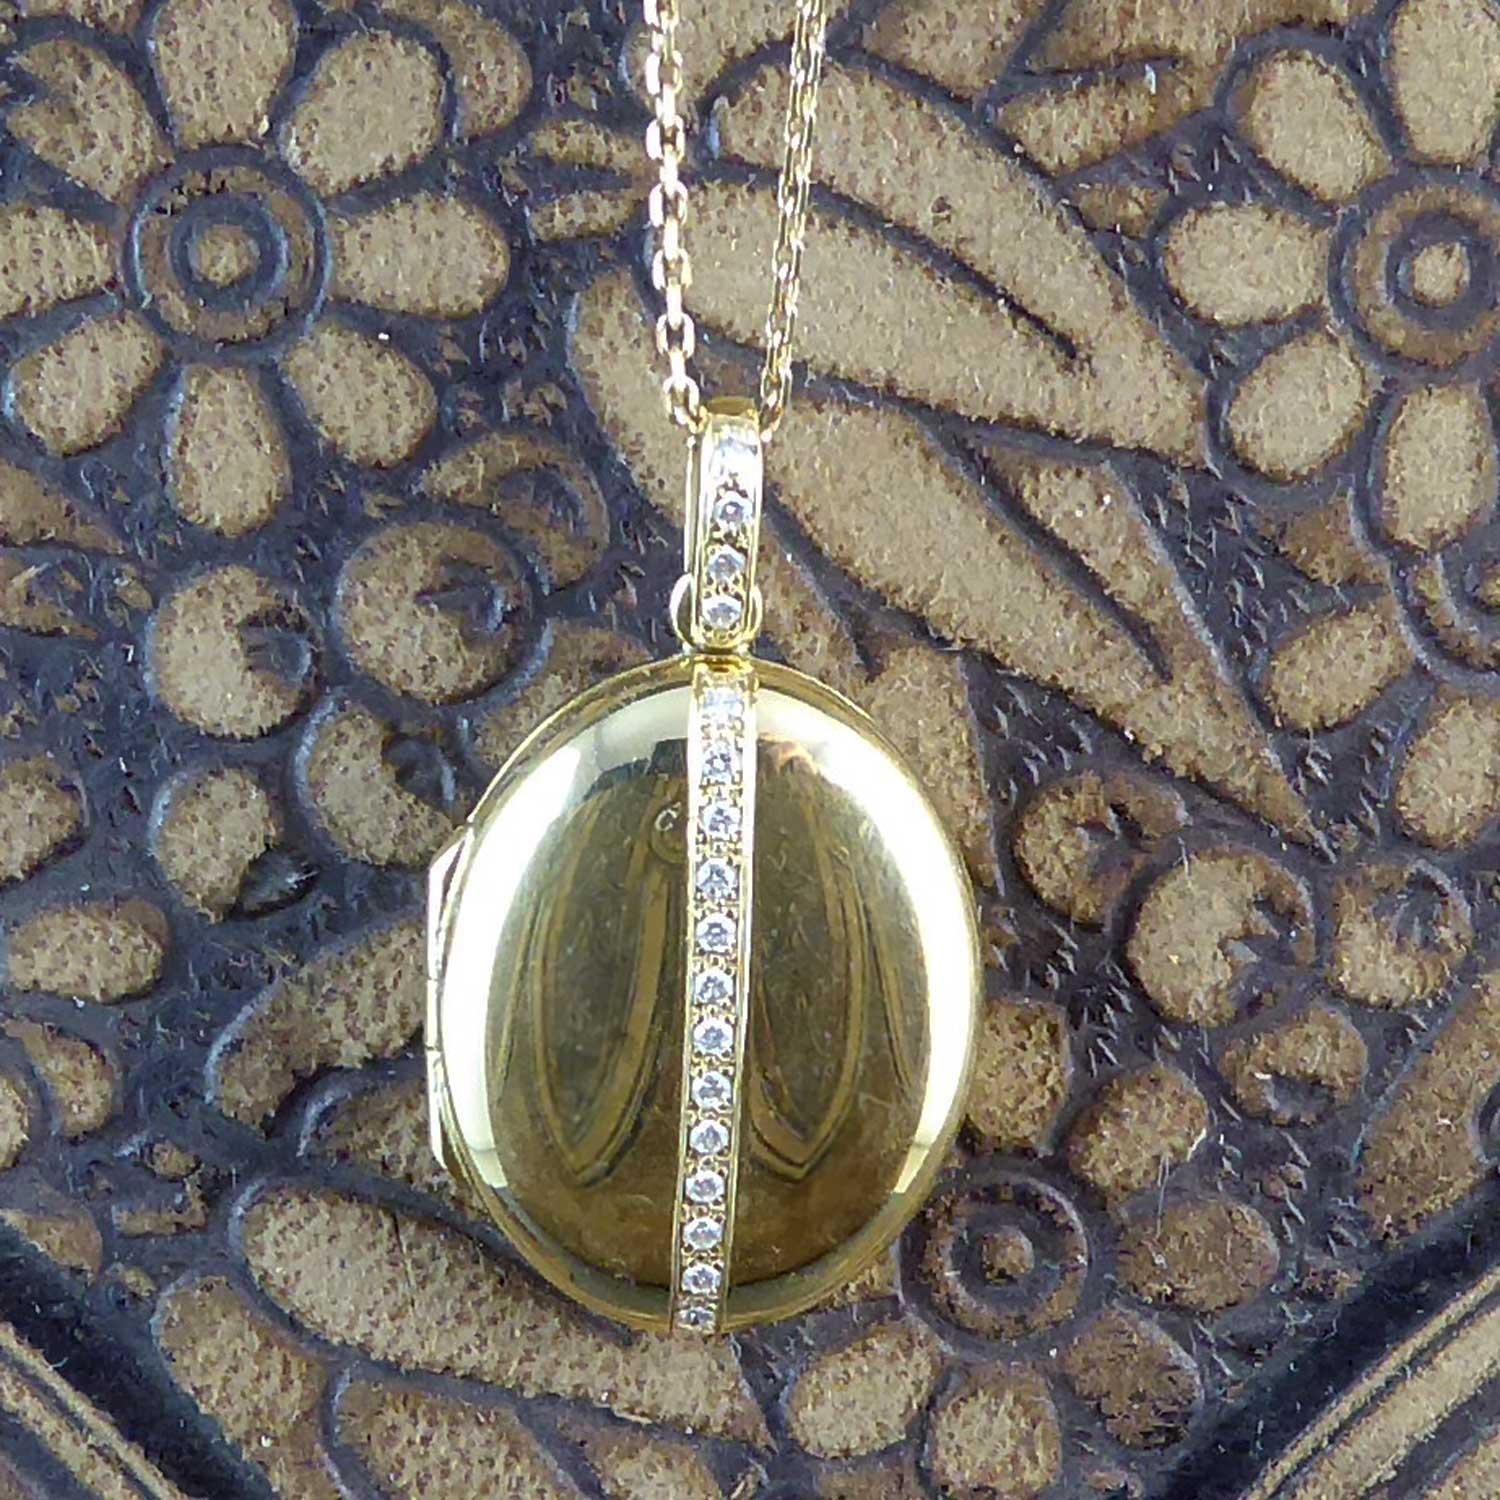 A pre-owned luxury locket crafted in 18ct yellow gold and brilliant cut diamonds by the renowned British locket makers, Charles Green.  The locket is fashioned in a pleasing oval shape of highly polished gold with a central vertical line of 13 pavé